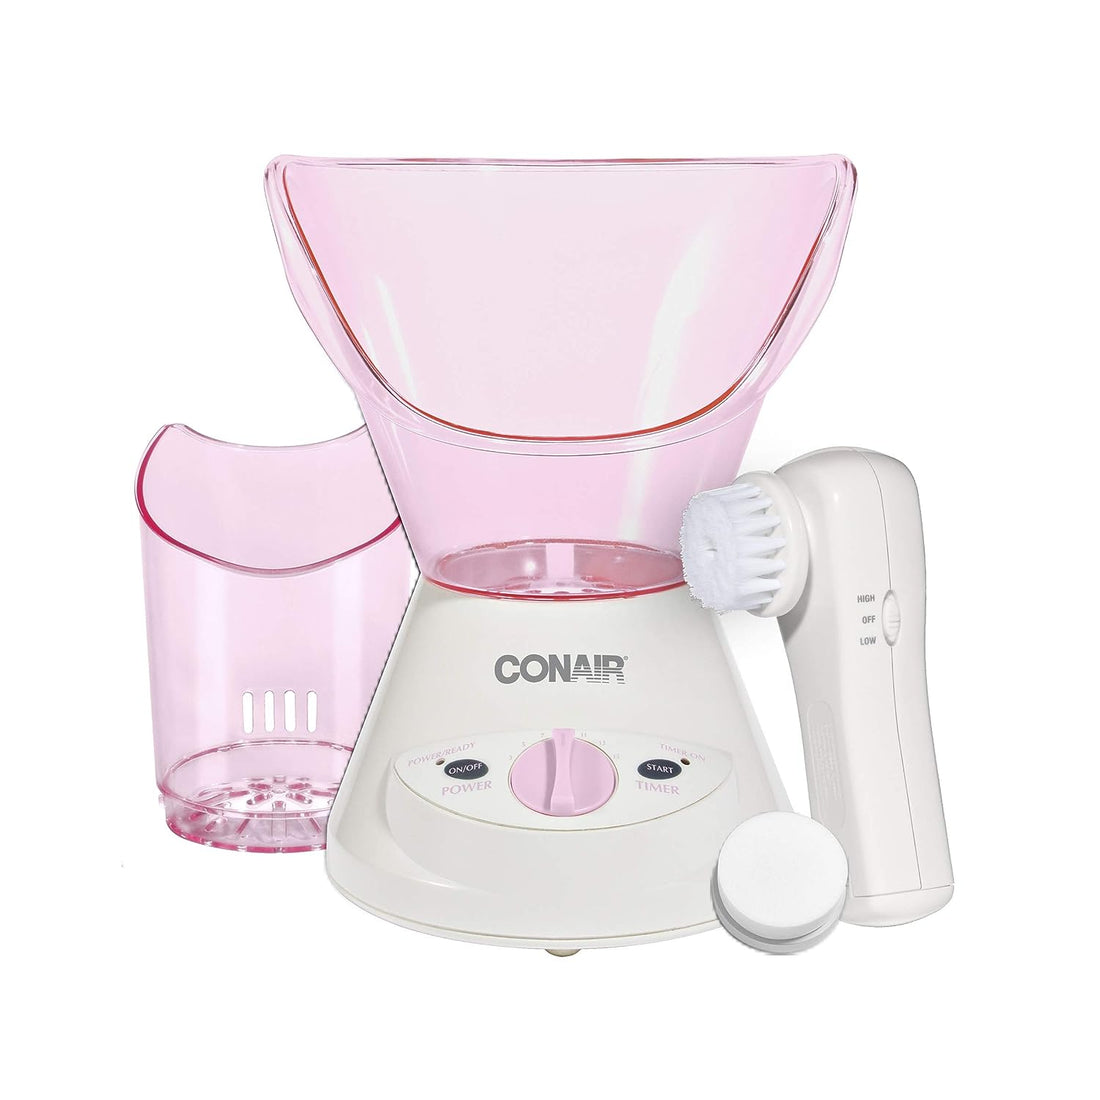 Conair True Glow by Gentle Mist Moisturizing Facial Sauna System with Facial Cleansing Brush